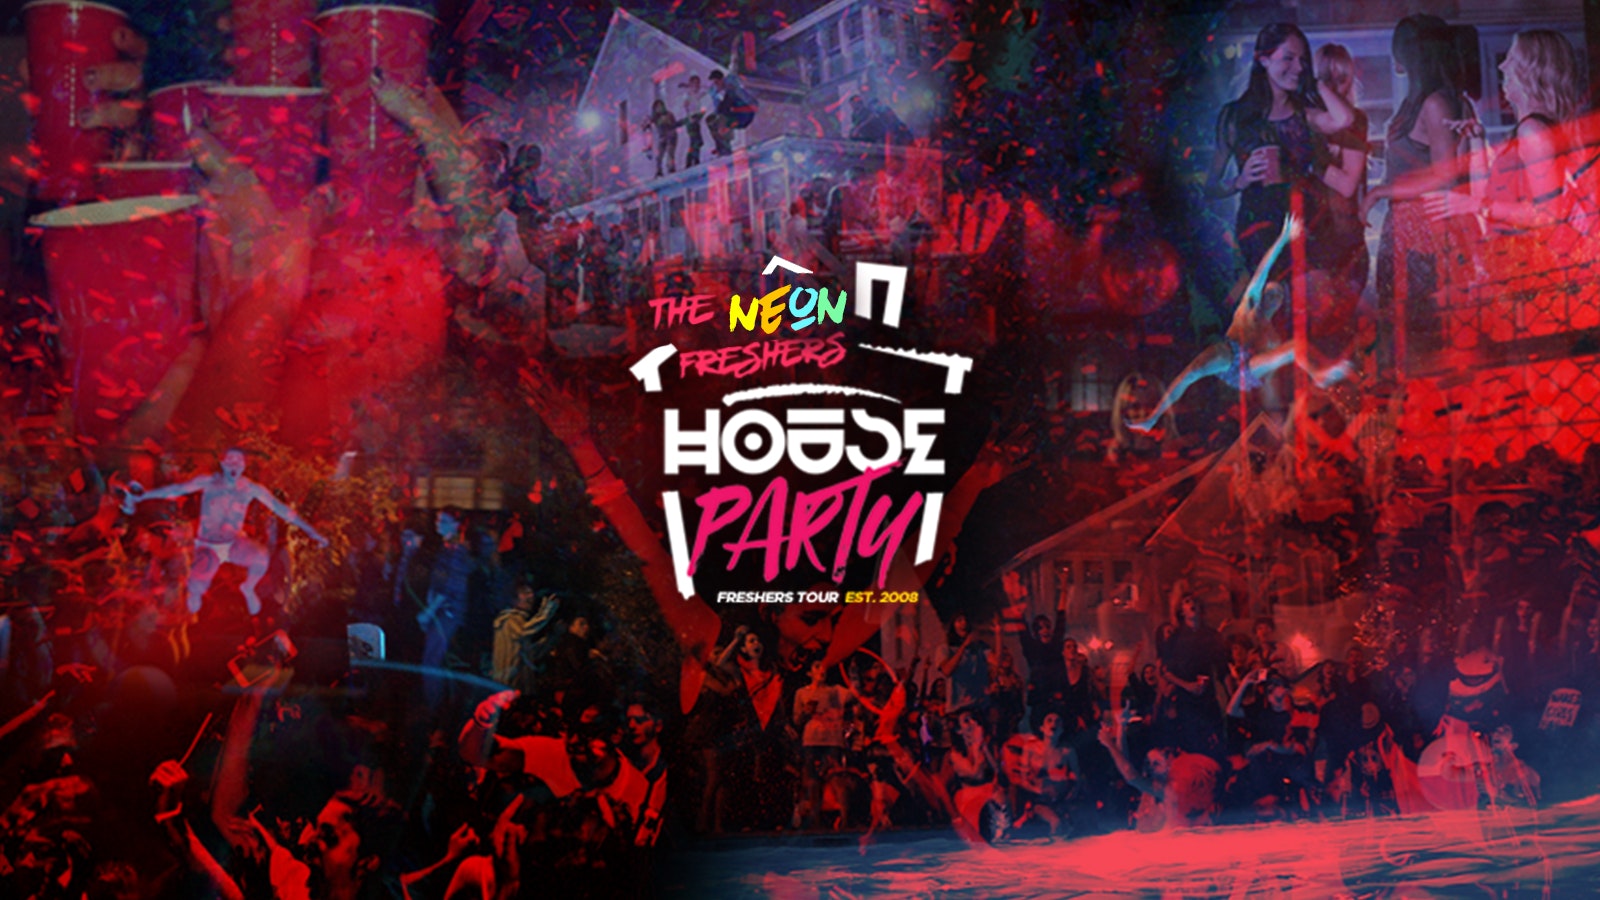 Neon Freshers House Party // Gloucester